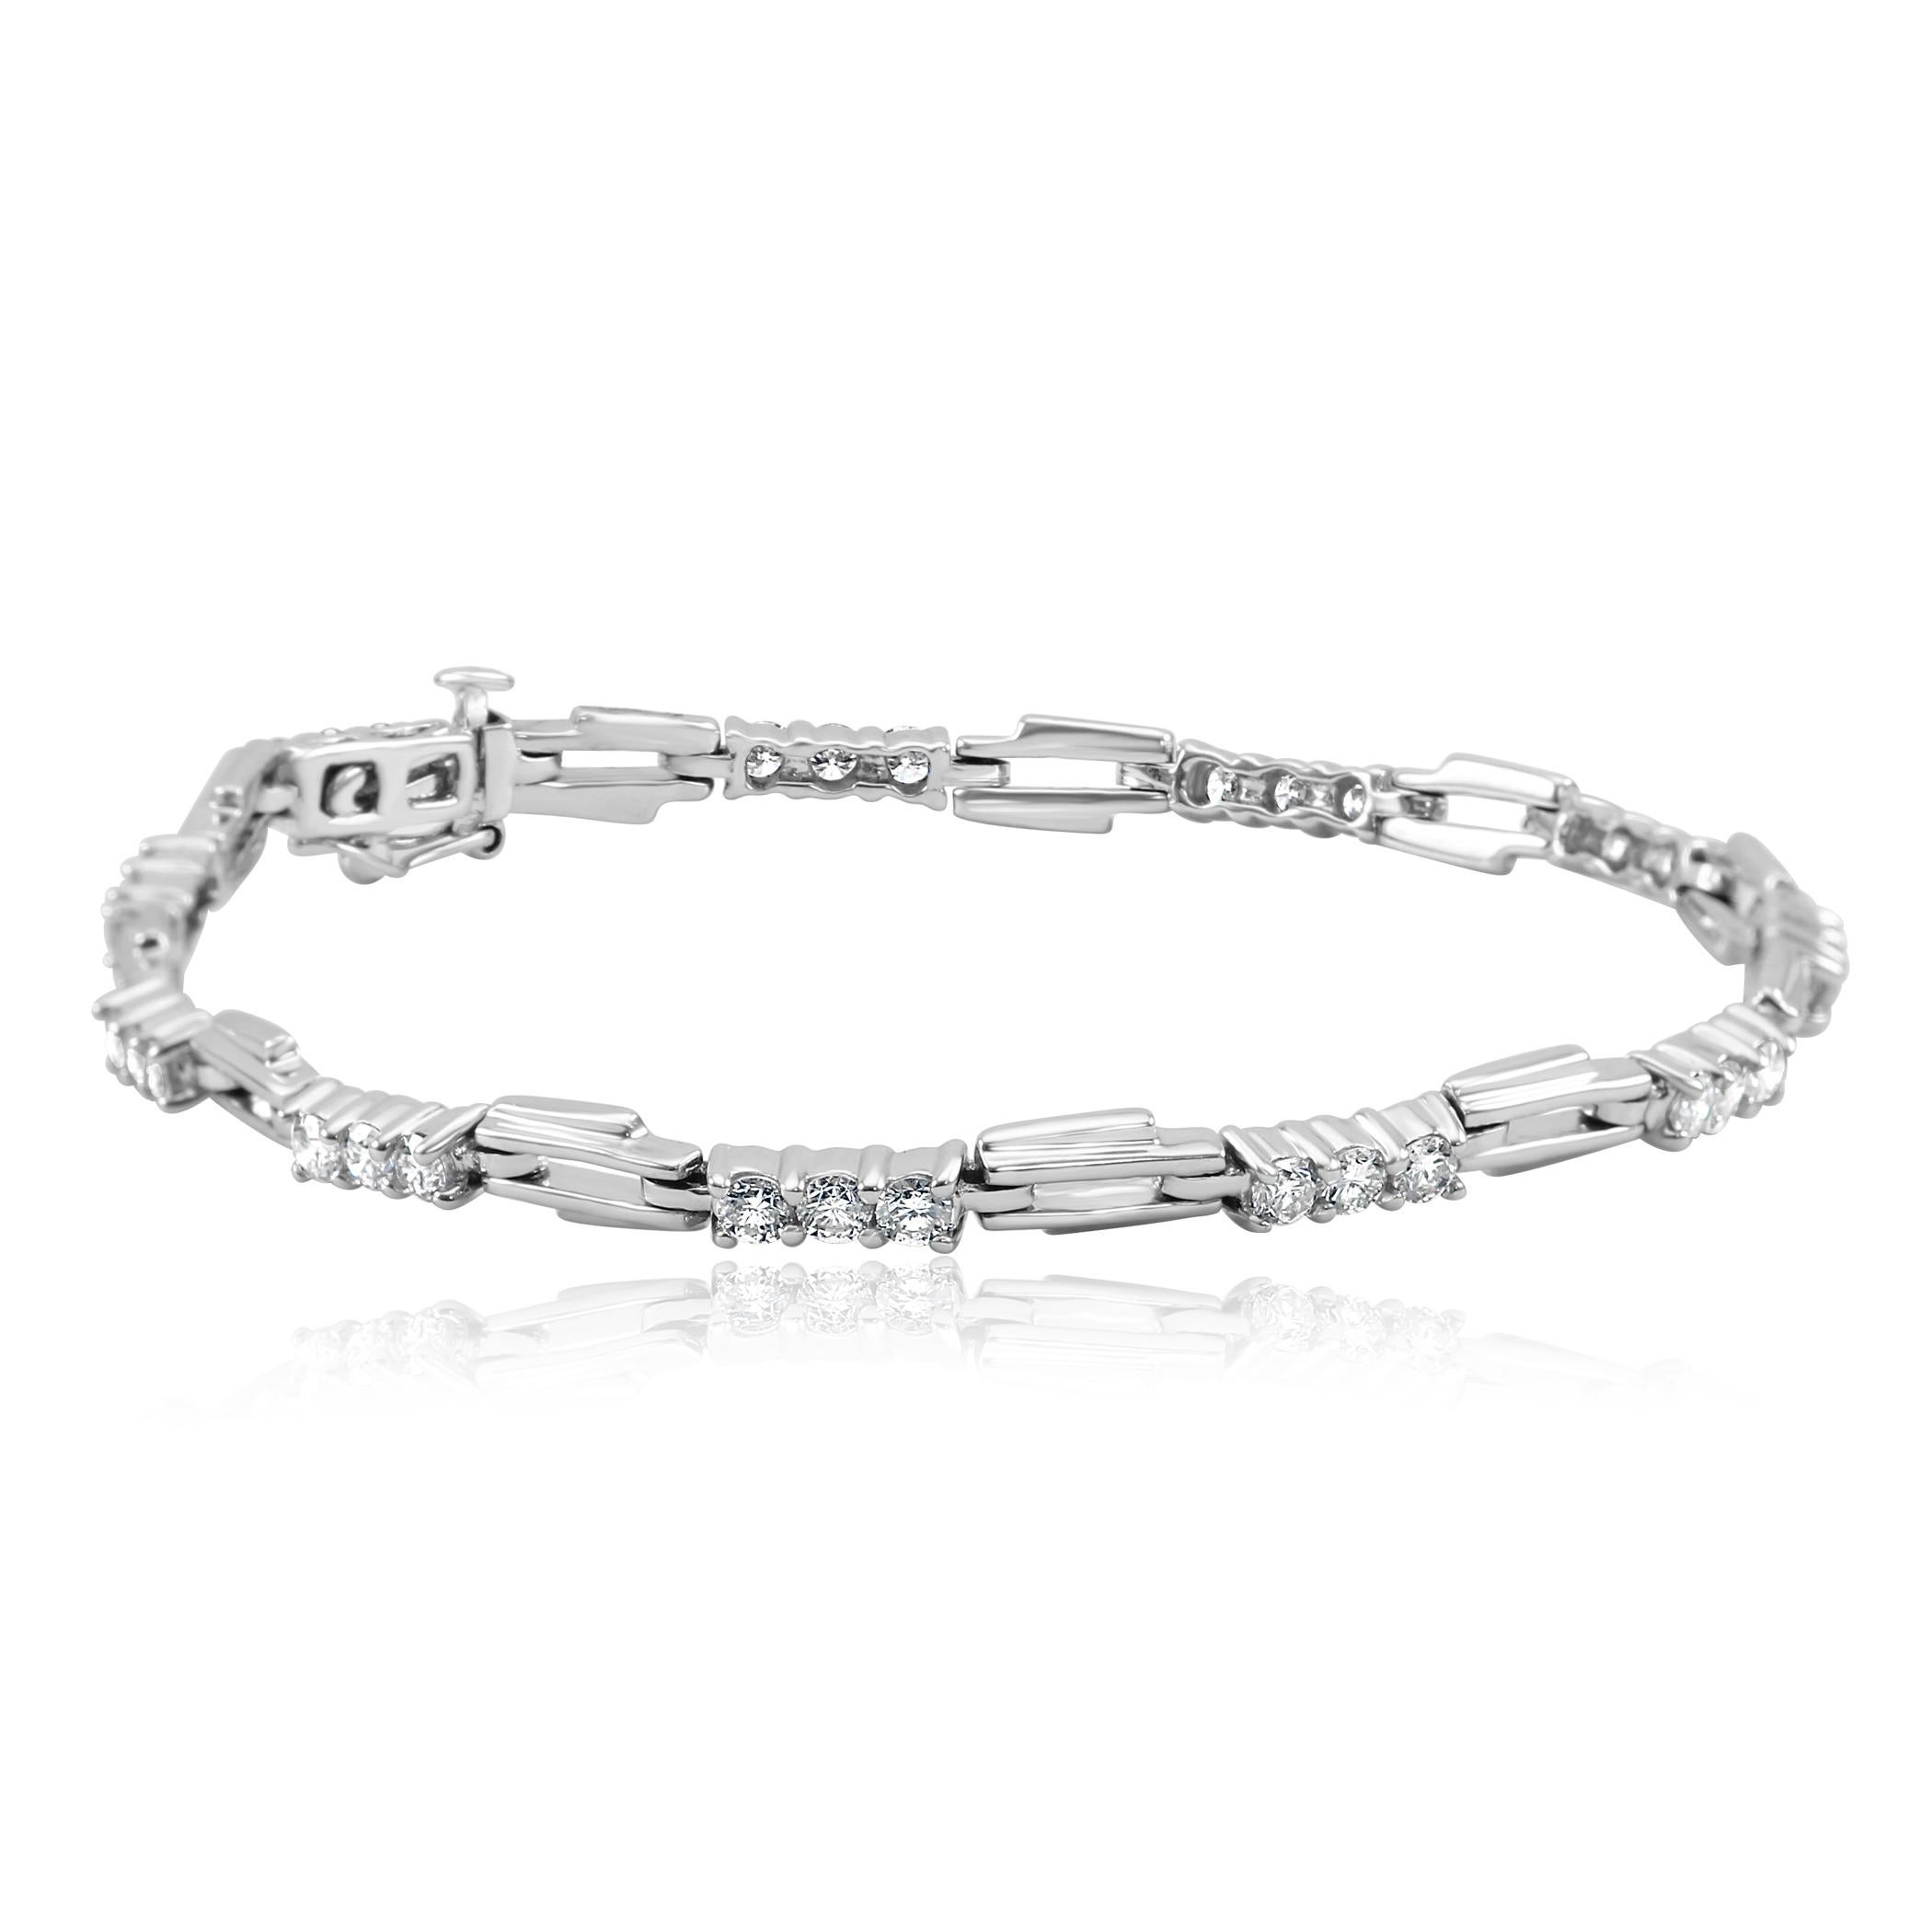 33 White G-H Color SI Clarity Diamond Round 1.80 Carat Total Weight Set in 14K White Gold Always in Style for Every Occasion Single Stackable Tennis Bracelet. With Double Lock for Extra safety.

Total Diamond Weight 1.80 Carat
MADE IN USA

Style